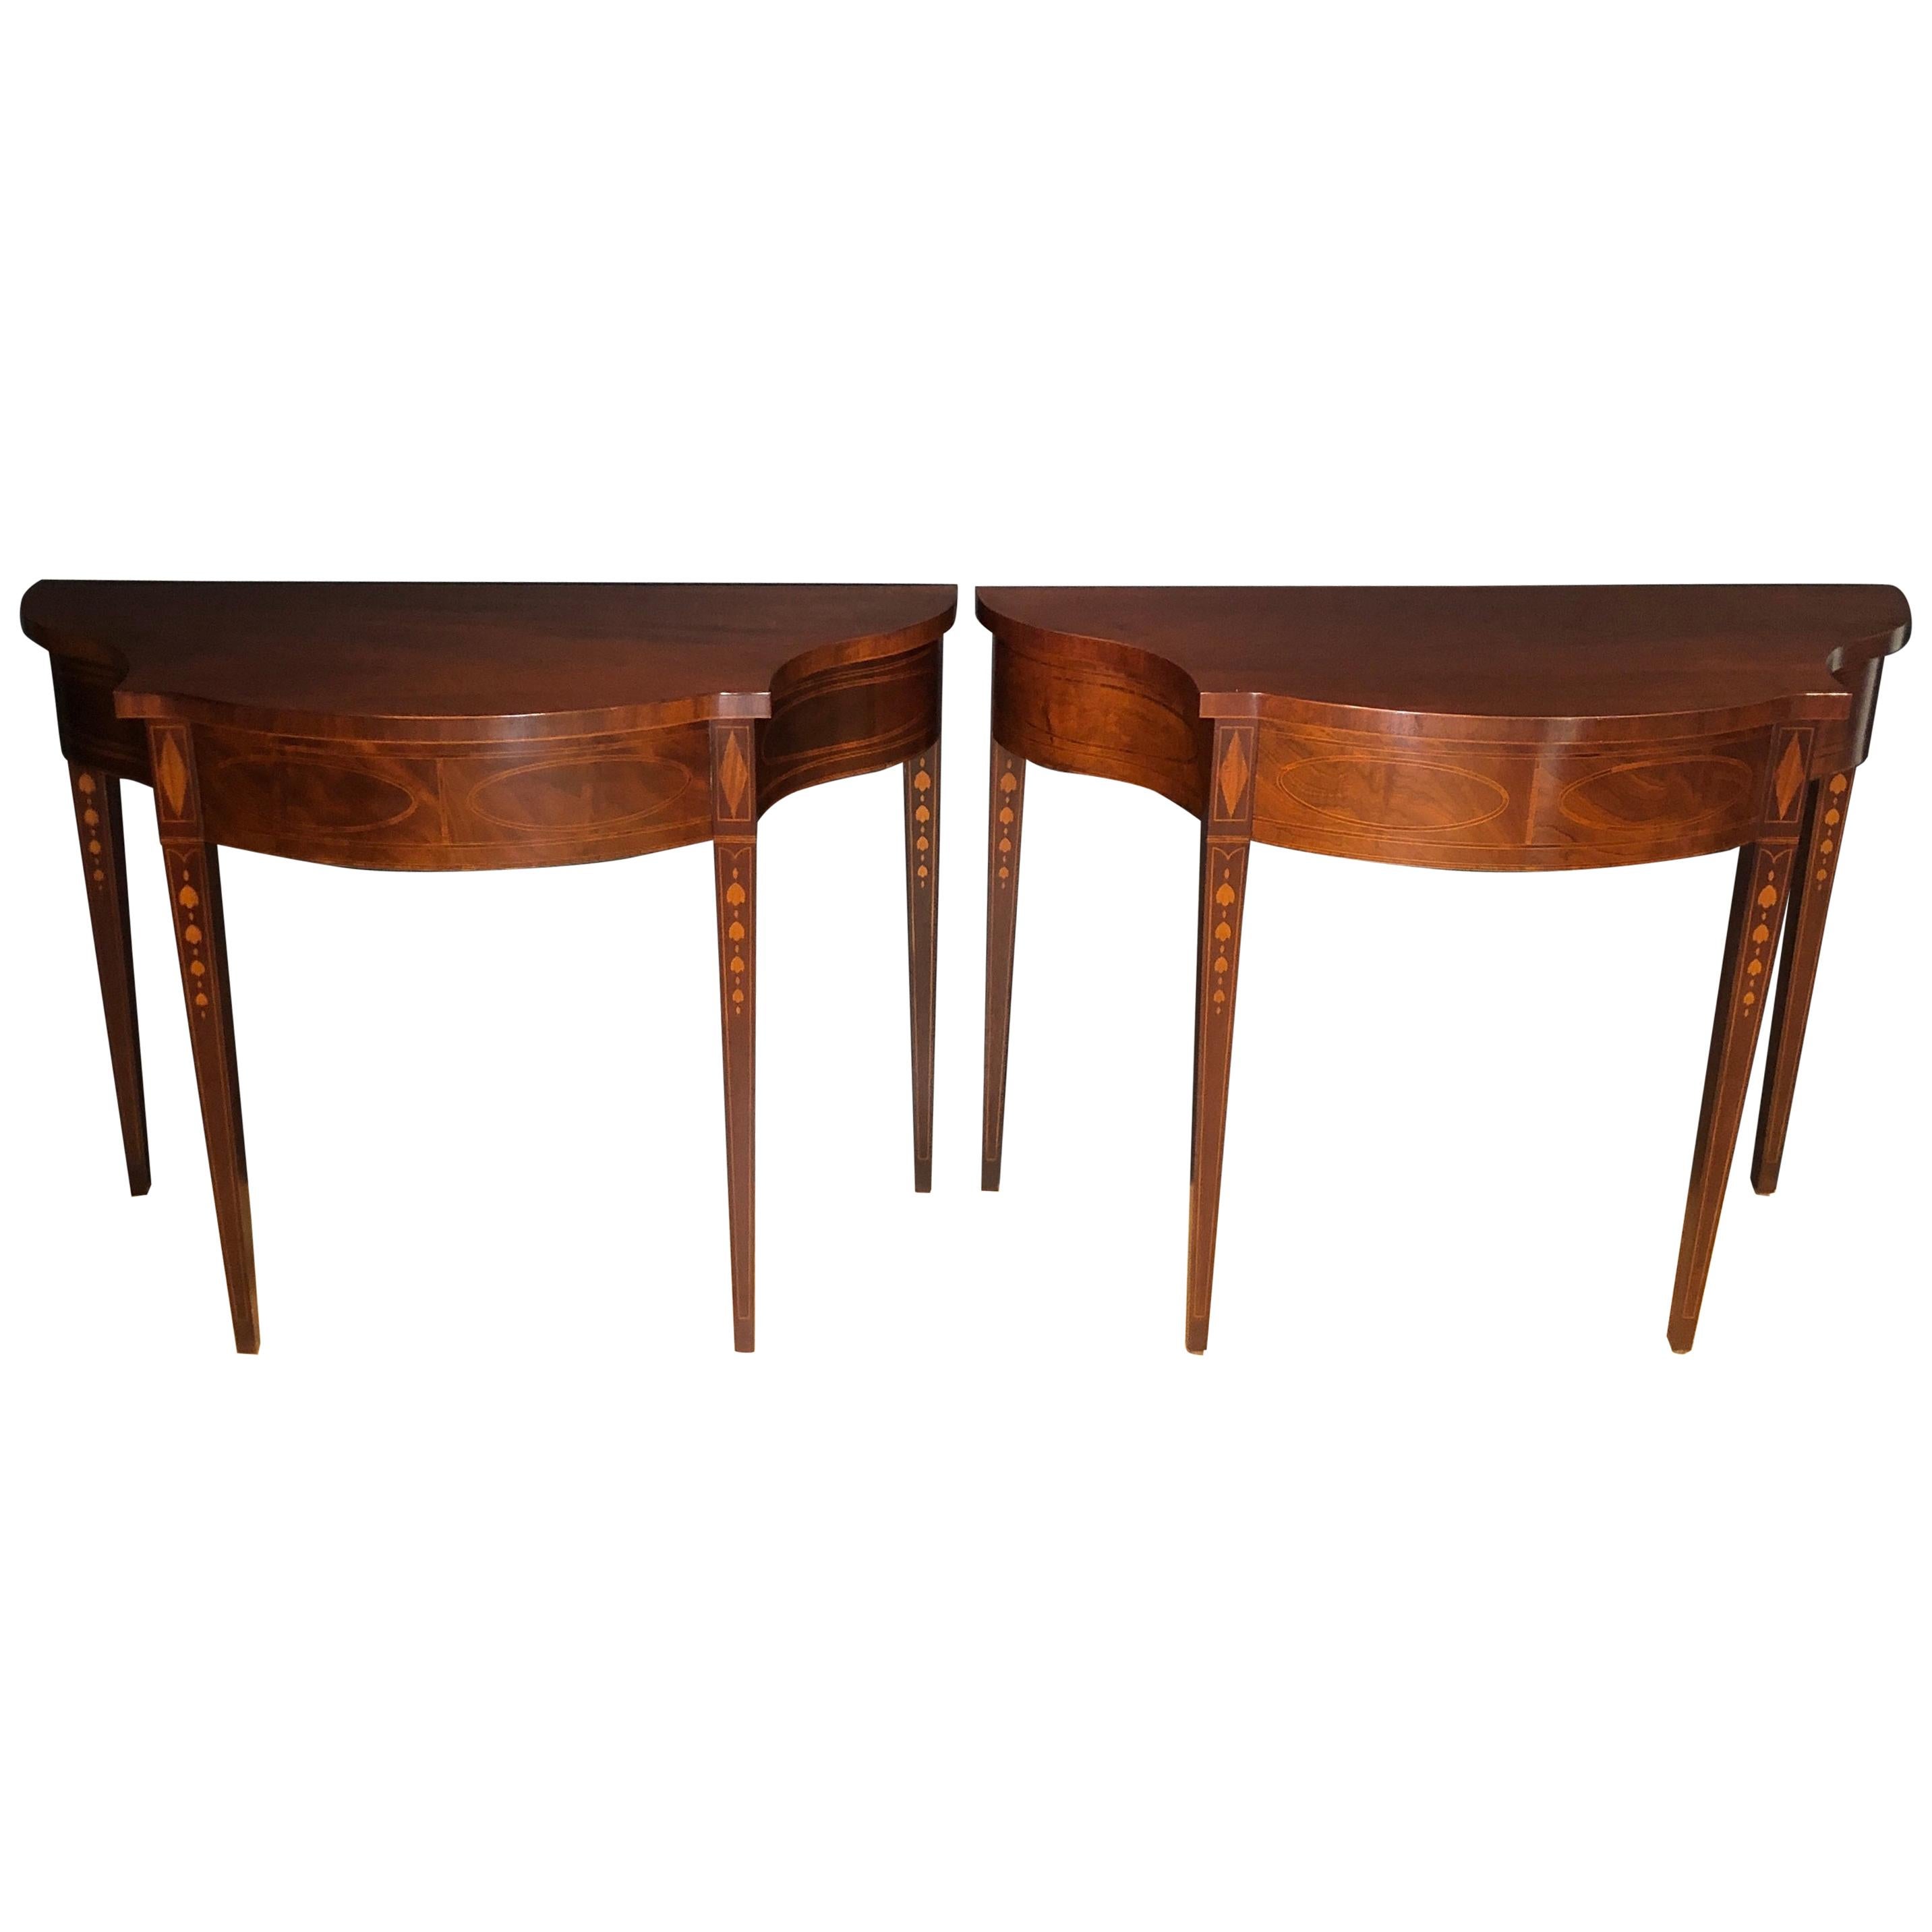 Pair of Historic Charleston Demilune Console Tables by Baker